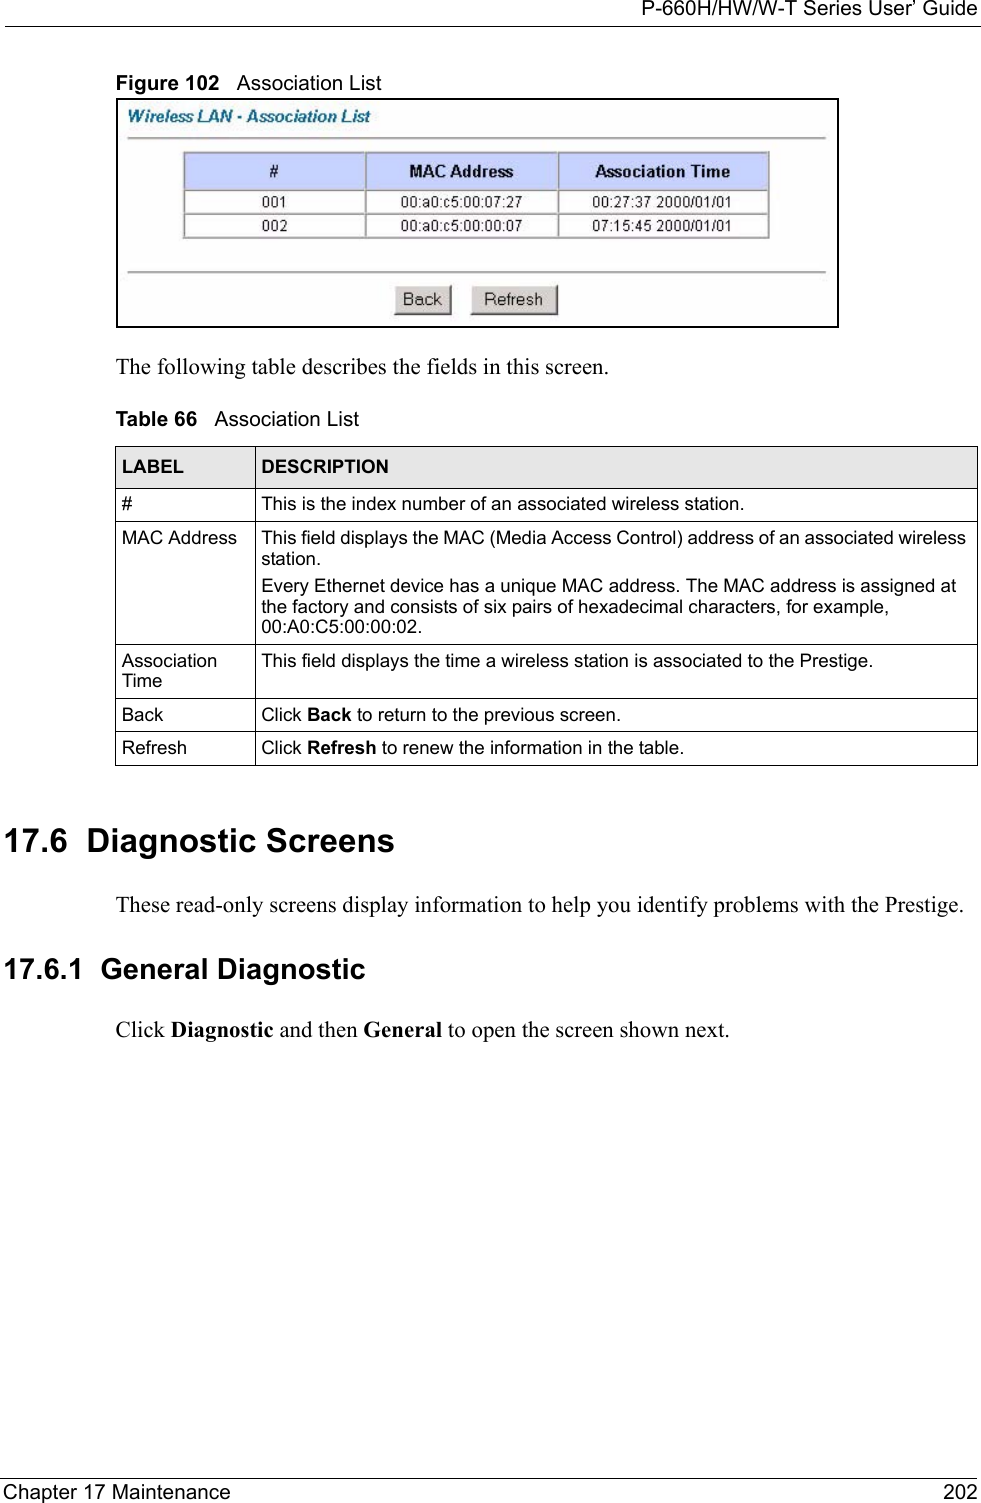 P-660H/HW/W-T Series User’ GuideChapter 17 Maintenance 202Figure 102   Association ListThe following table describes the fields in this screen.  17.6  Diagnostic Screens  These read-only screens display information to help you identify problems with the Prestige.17.6.1  General Diagnostic     Click Diagnostic and then General to open the screen shown next. Table 66   Association ListLABEL DESCRIPTION#This is the index number of an associated wireless station.MAC Address  This field displays the MAC (Media Access Control) address of an associated wireless station.Every Ethernet device has a unique MAC address. The MAC address is assigned at the factory and consists of six pairs of hexadecimal characters, for example, 00:A0:C5:00:00:02.Association TimeThis field displays the time a wireless station is associated to the Prestige. Back  Click Back to return to the previous screen.Refresh Click Refresh to renew the information in the table.